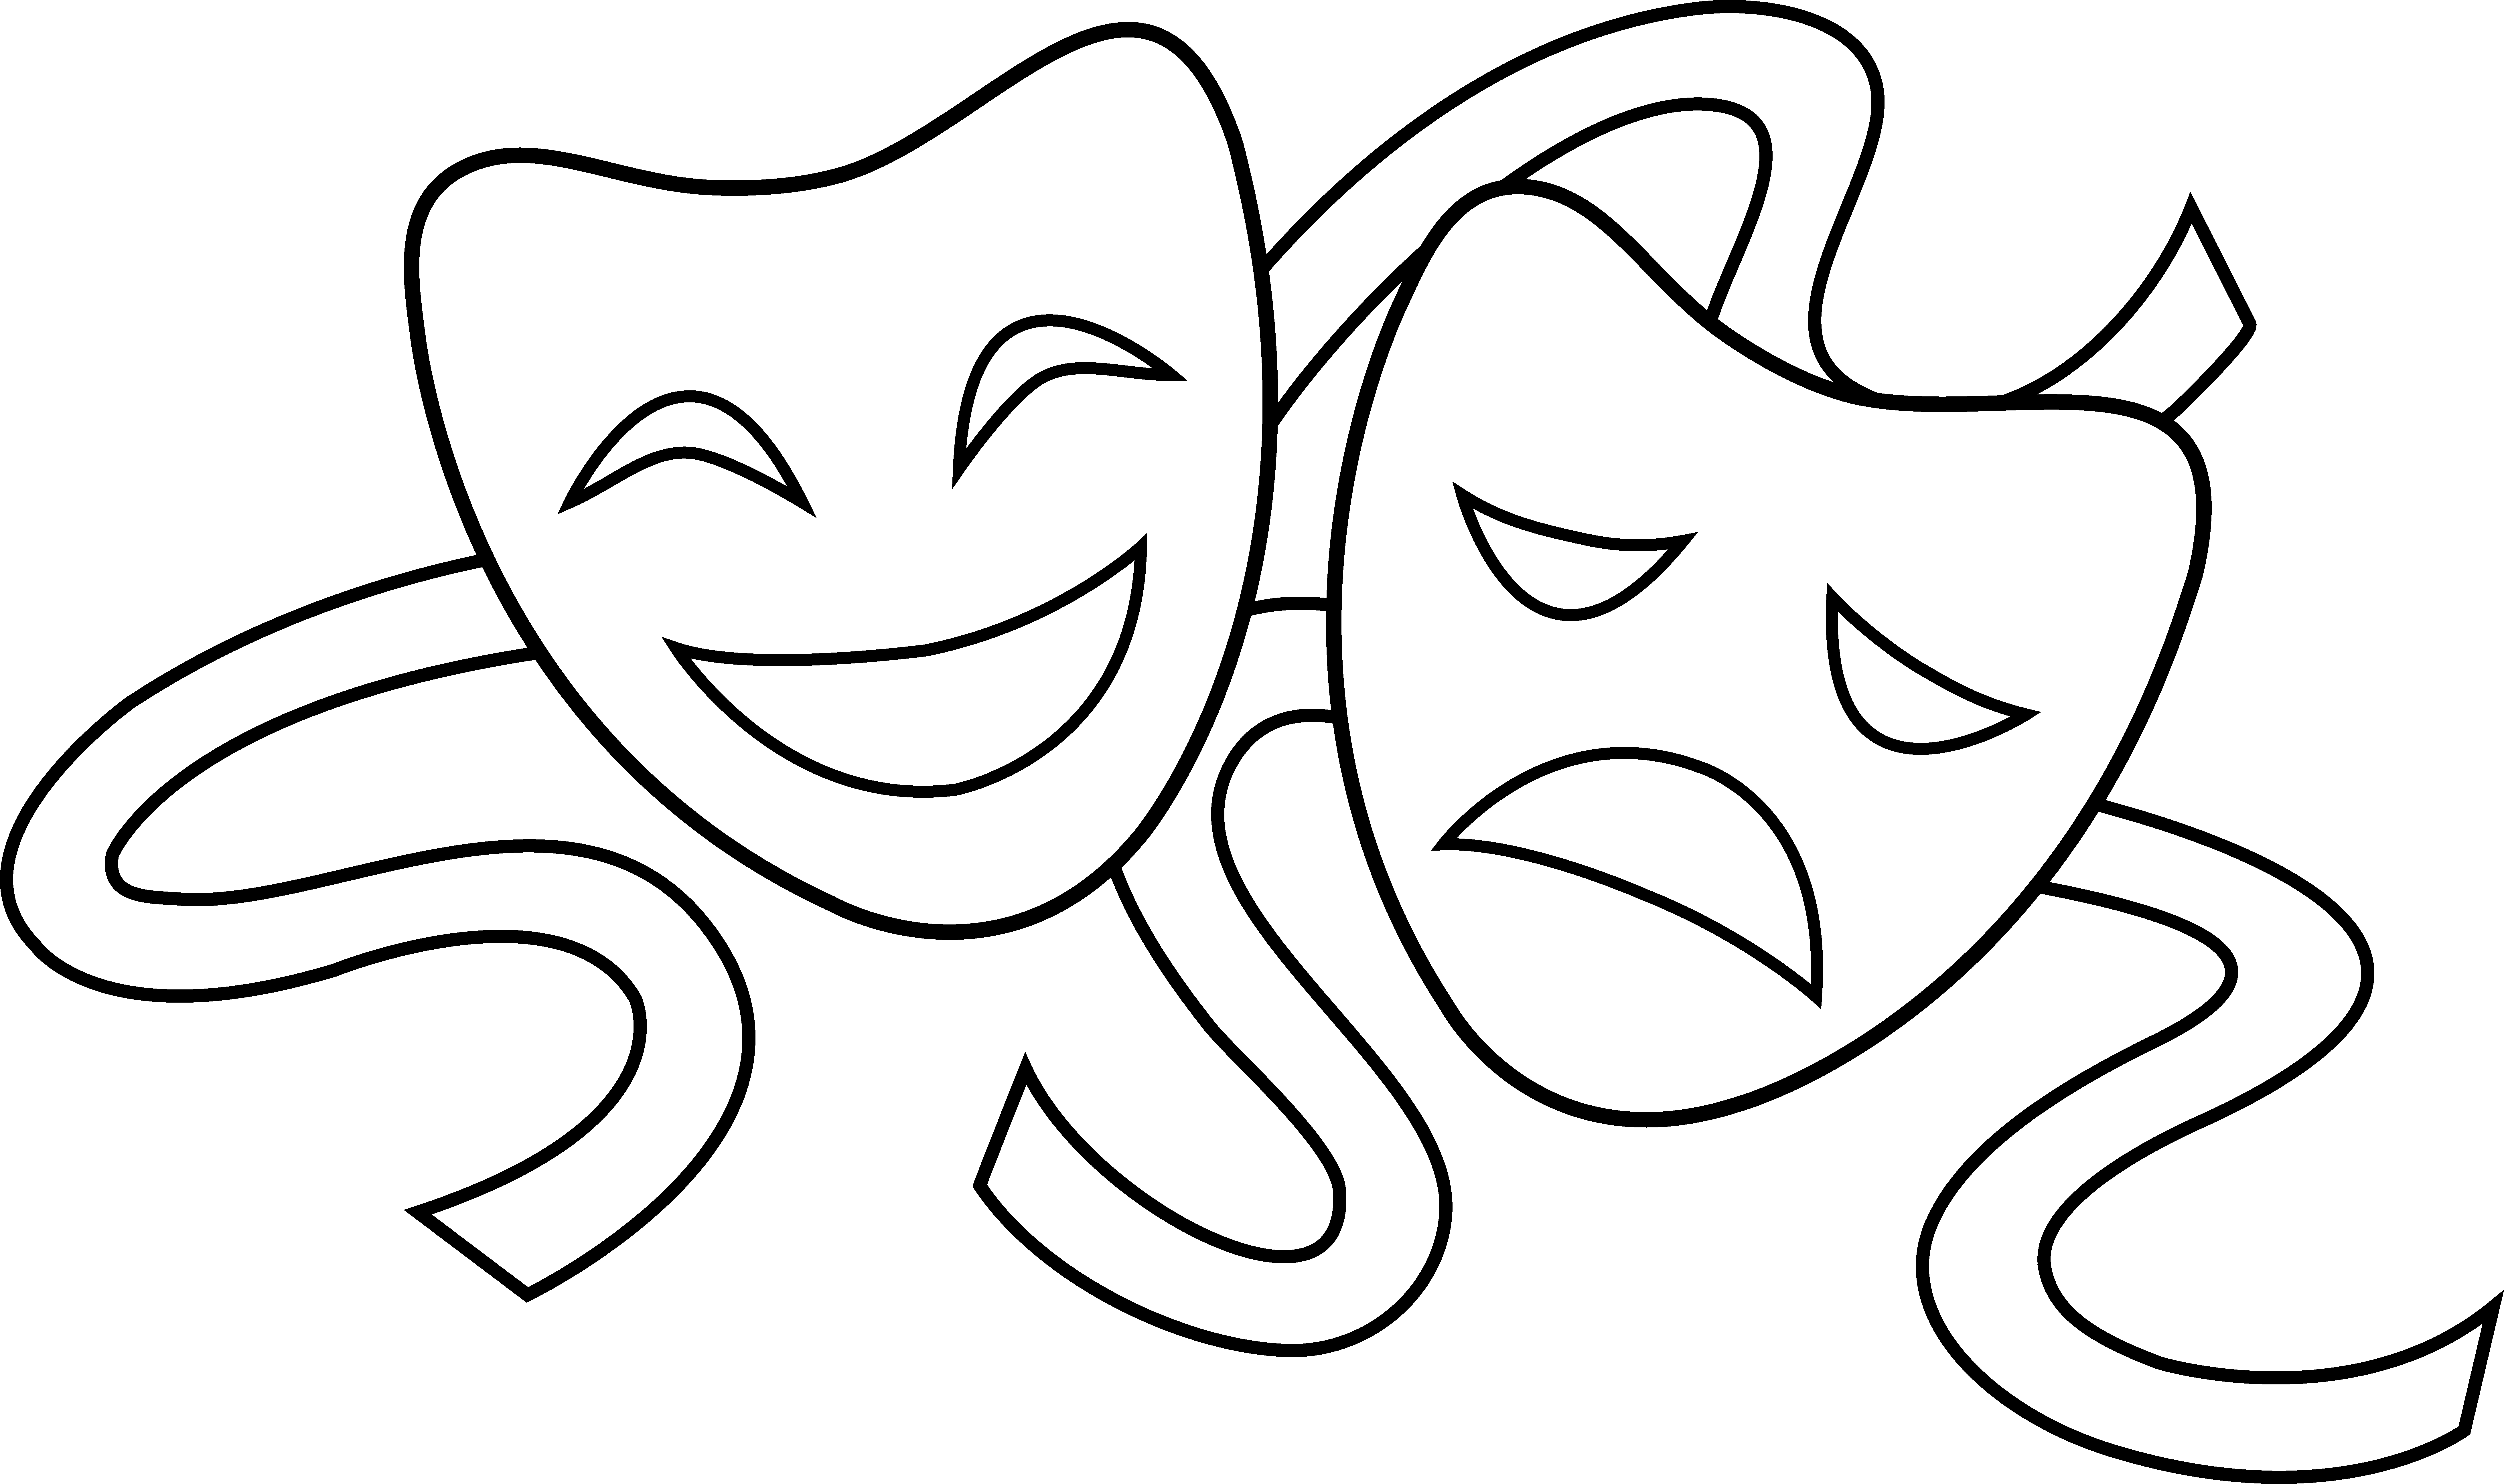 Happy Sad Drama Masks Images & Pictures - Becuo